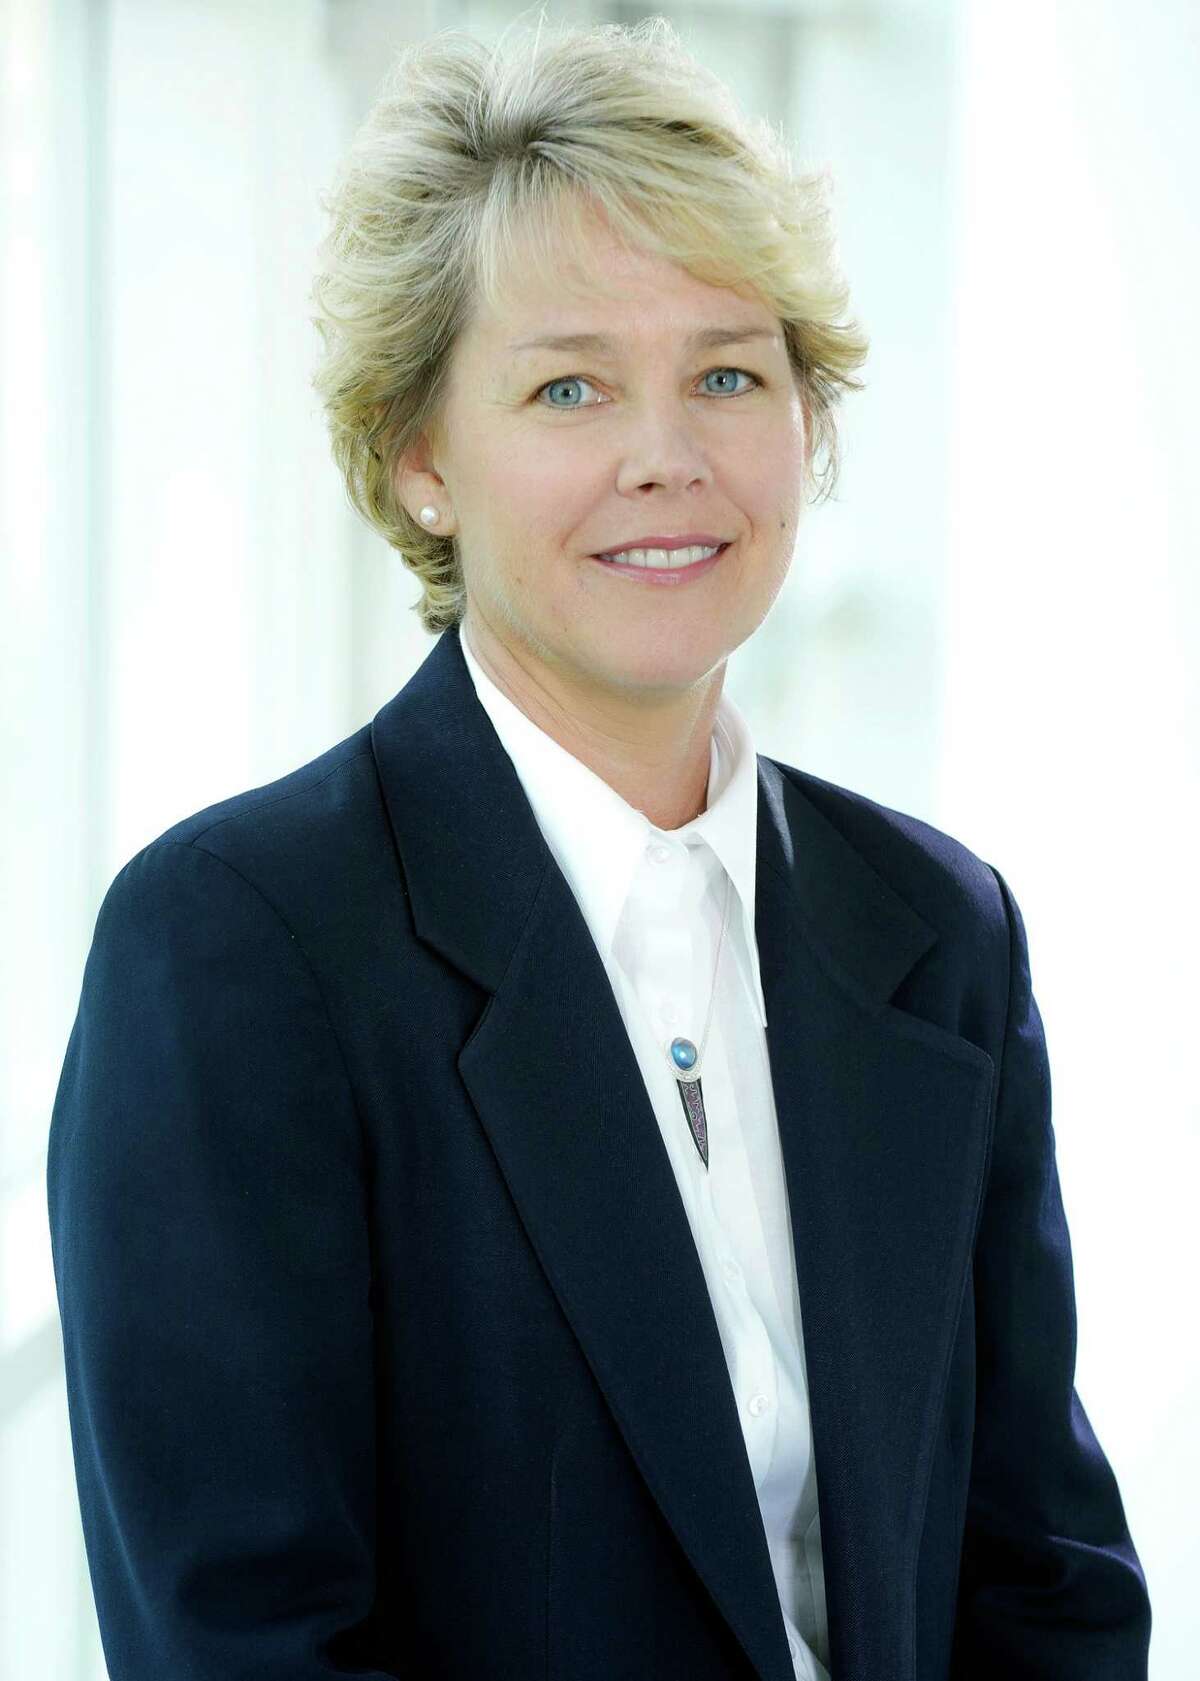 Lisa Davis is a member of the managing board for Siemens, a German industrial conglomerate with oil and gas headquarters in Houston. (Siemens photo)